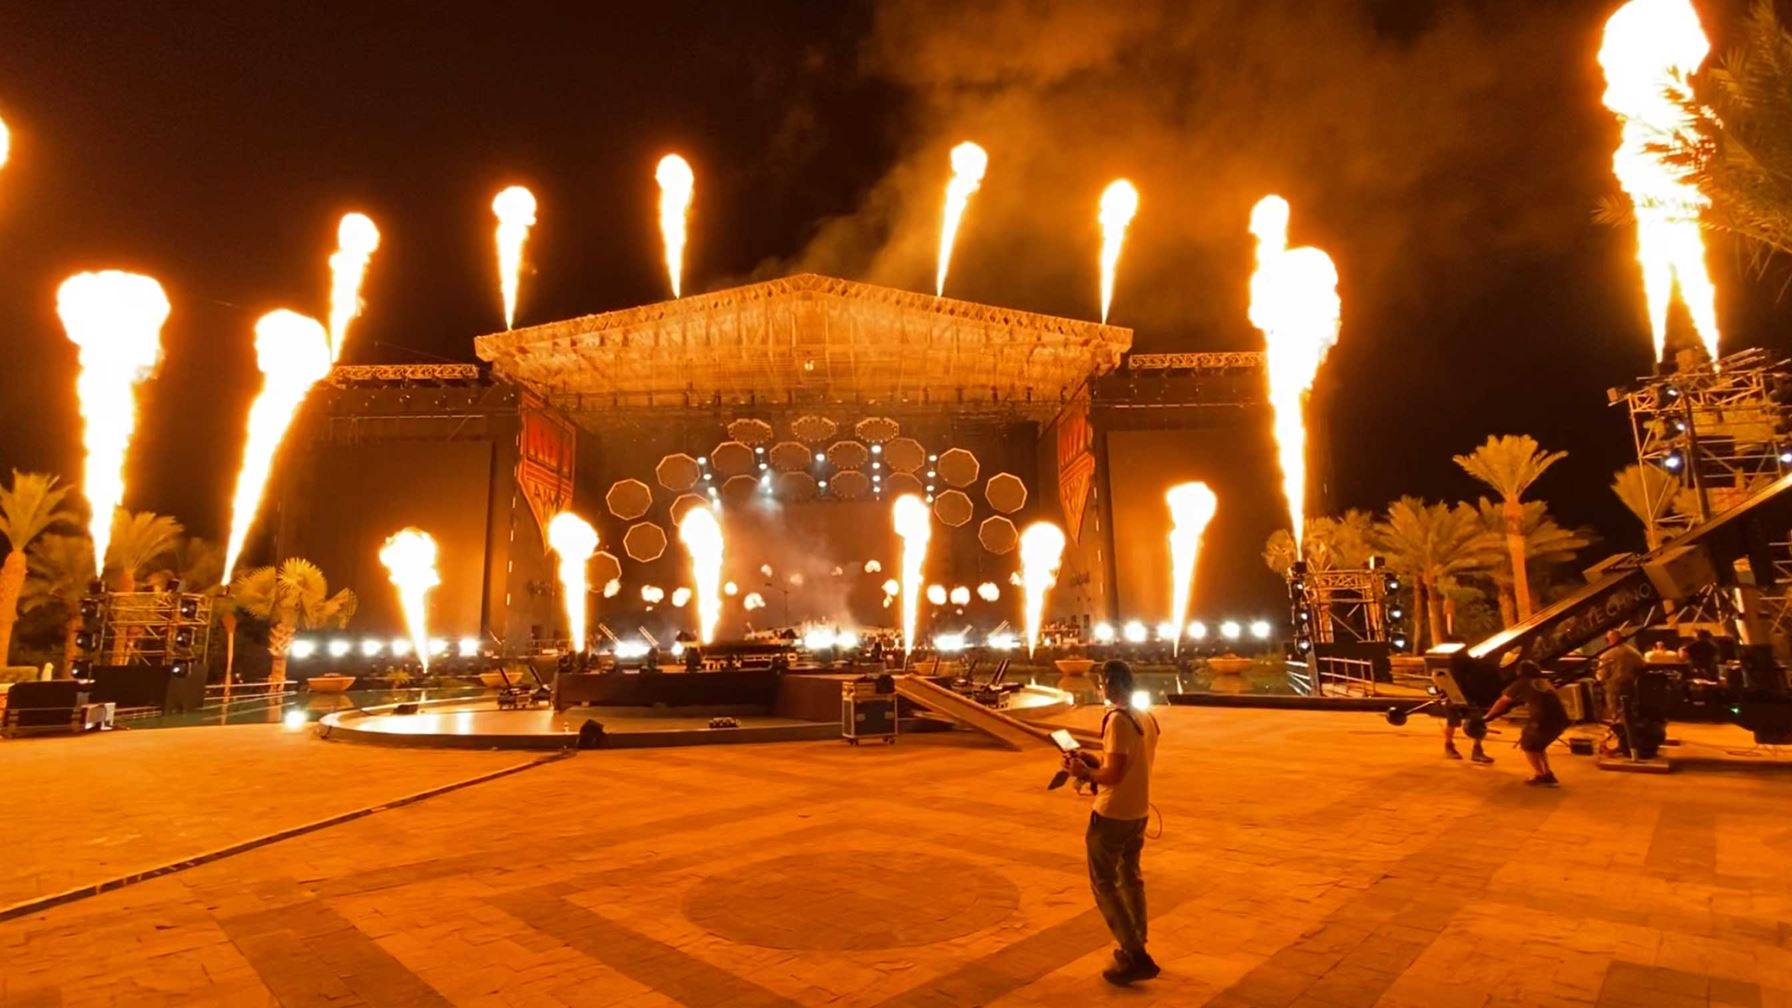 Power in tough conditions for record breaking concert